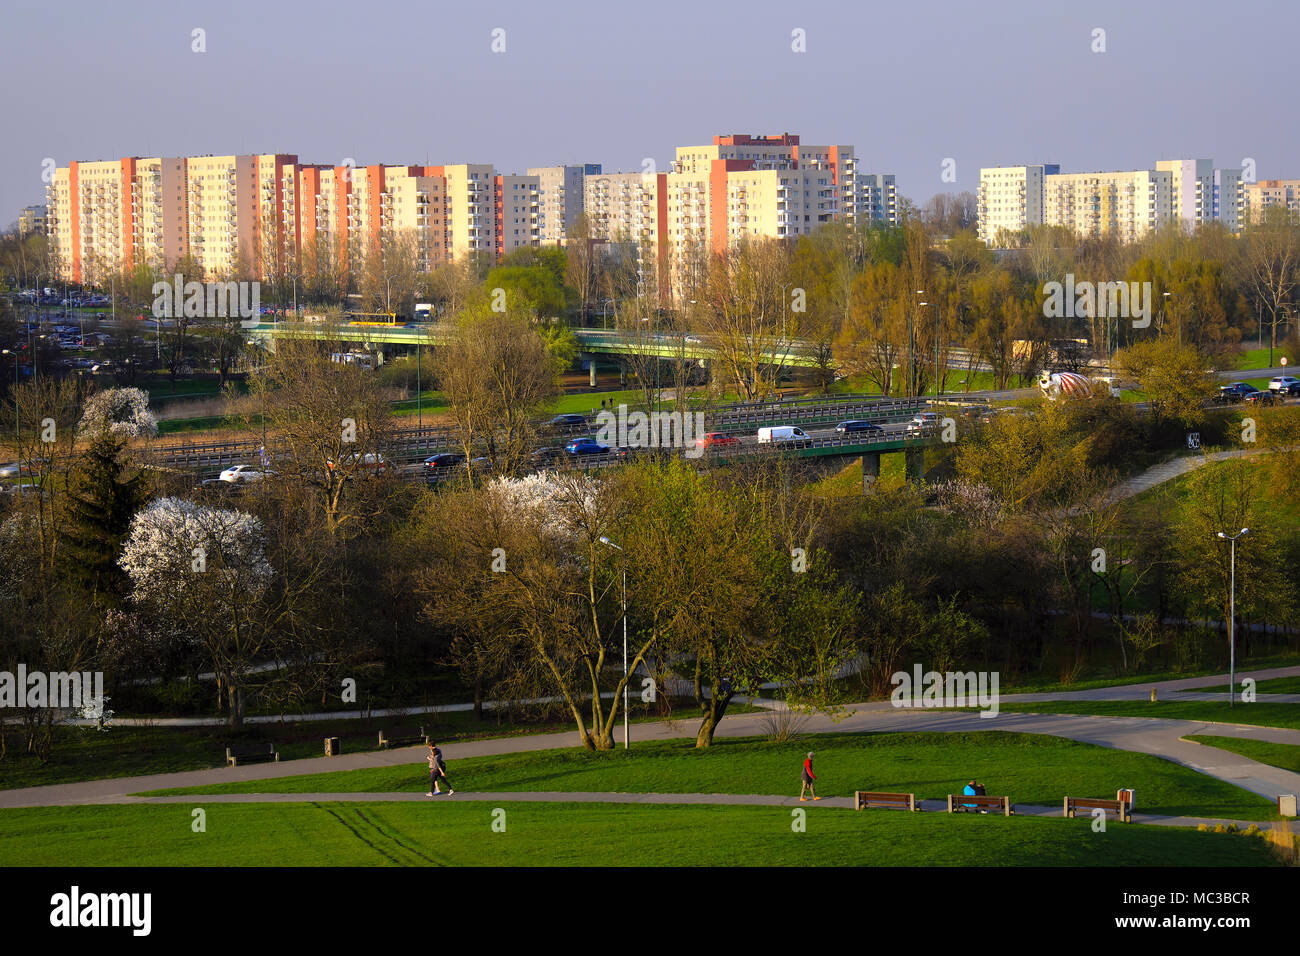 Warsaw, Mazovia / Poland - 2018/04/12: Panoramic view of Sluzew quarter - residential and utility district in southern Warsaw, combining post socialis Stock Photo